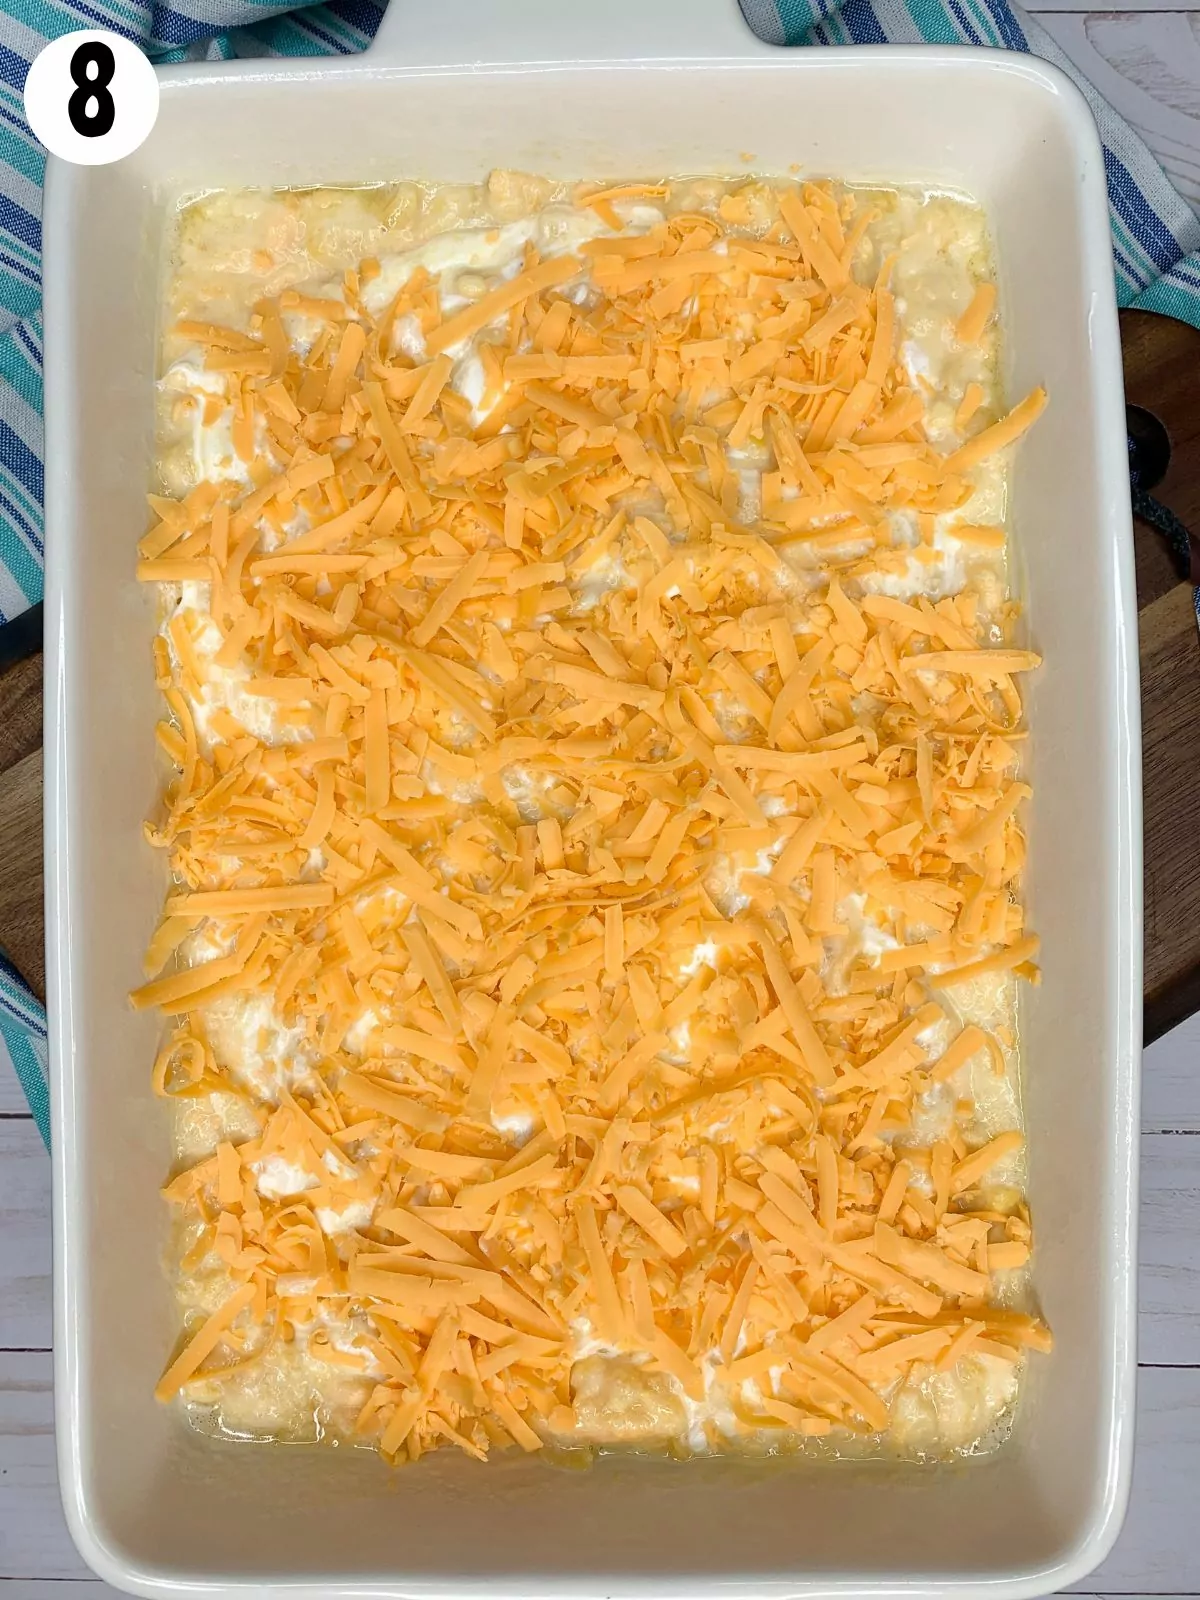 Add cheddar cheese to top of casserole dish.